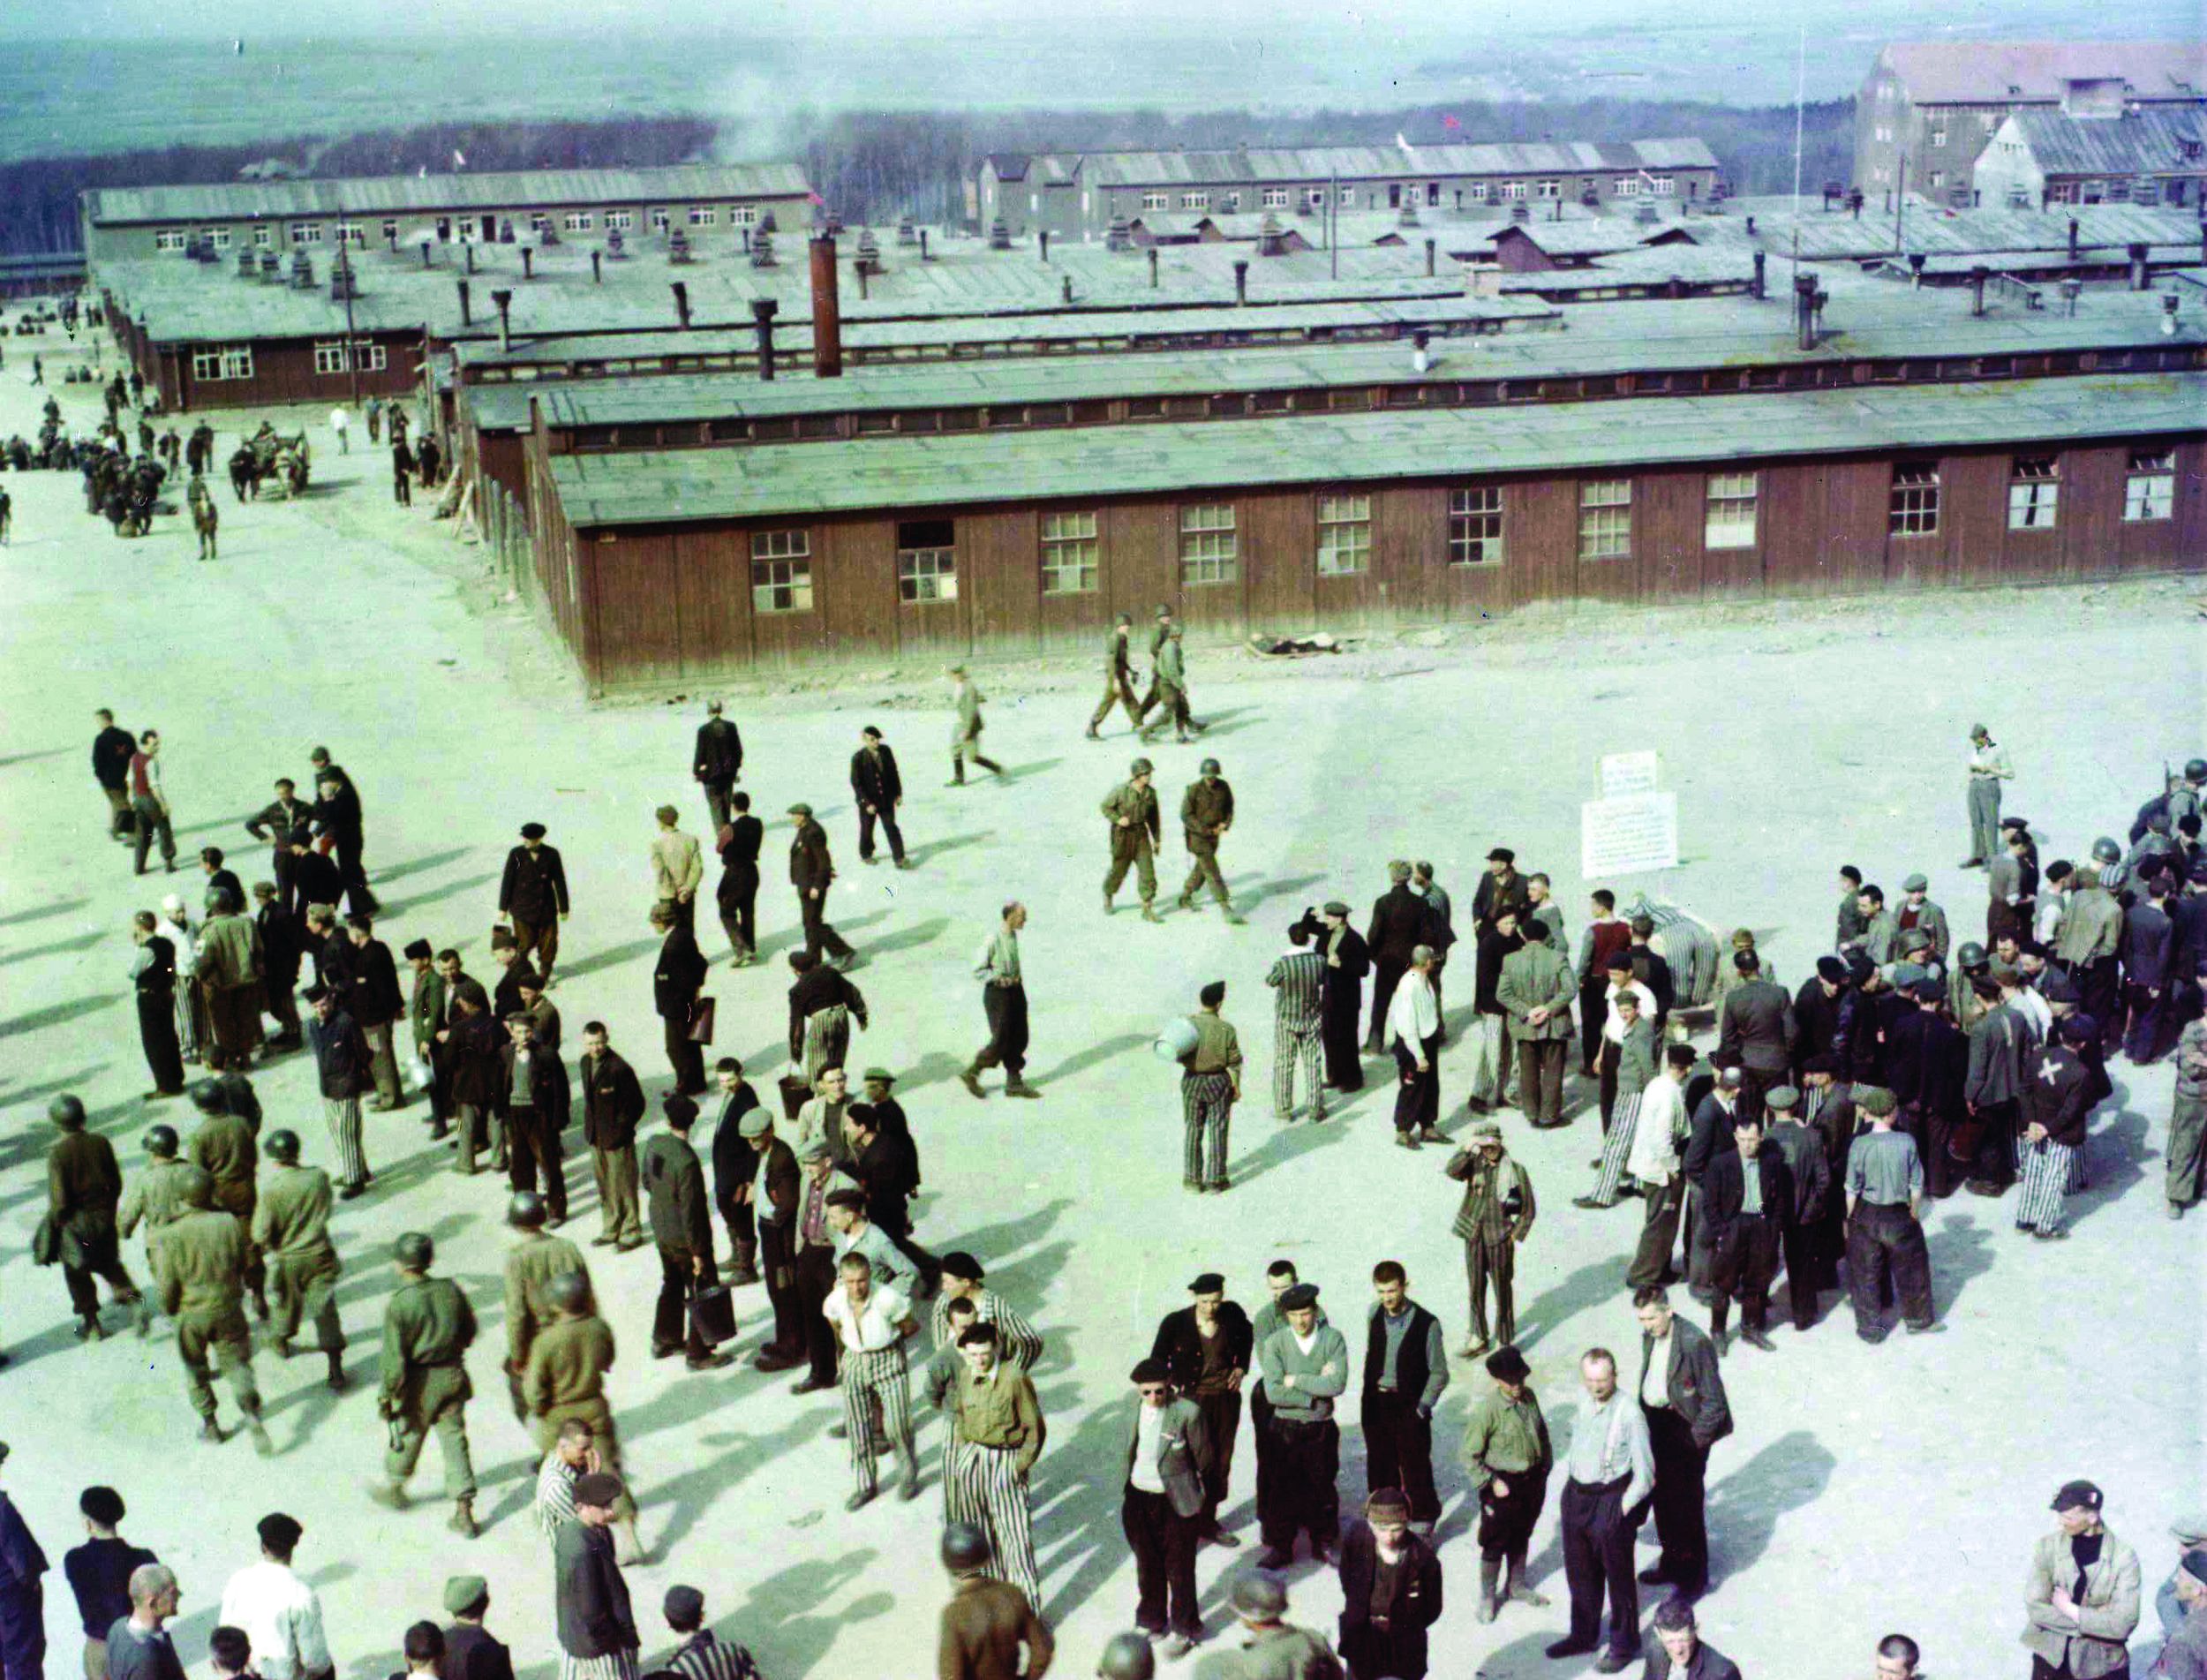 Waiting for transportation to Displaced Person Camps, former prisoners of Buchenwald who are able to walk mill around in the compound. Ultimately, they would be repatriated. This photo was taken from the guard tower near the main gate, which dominated the entire camp. (National Archives)